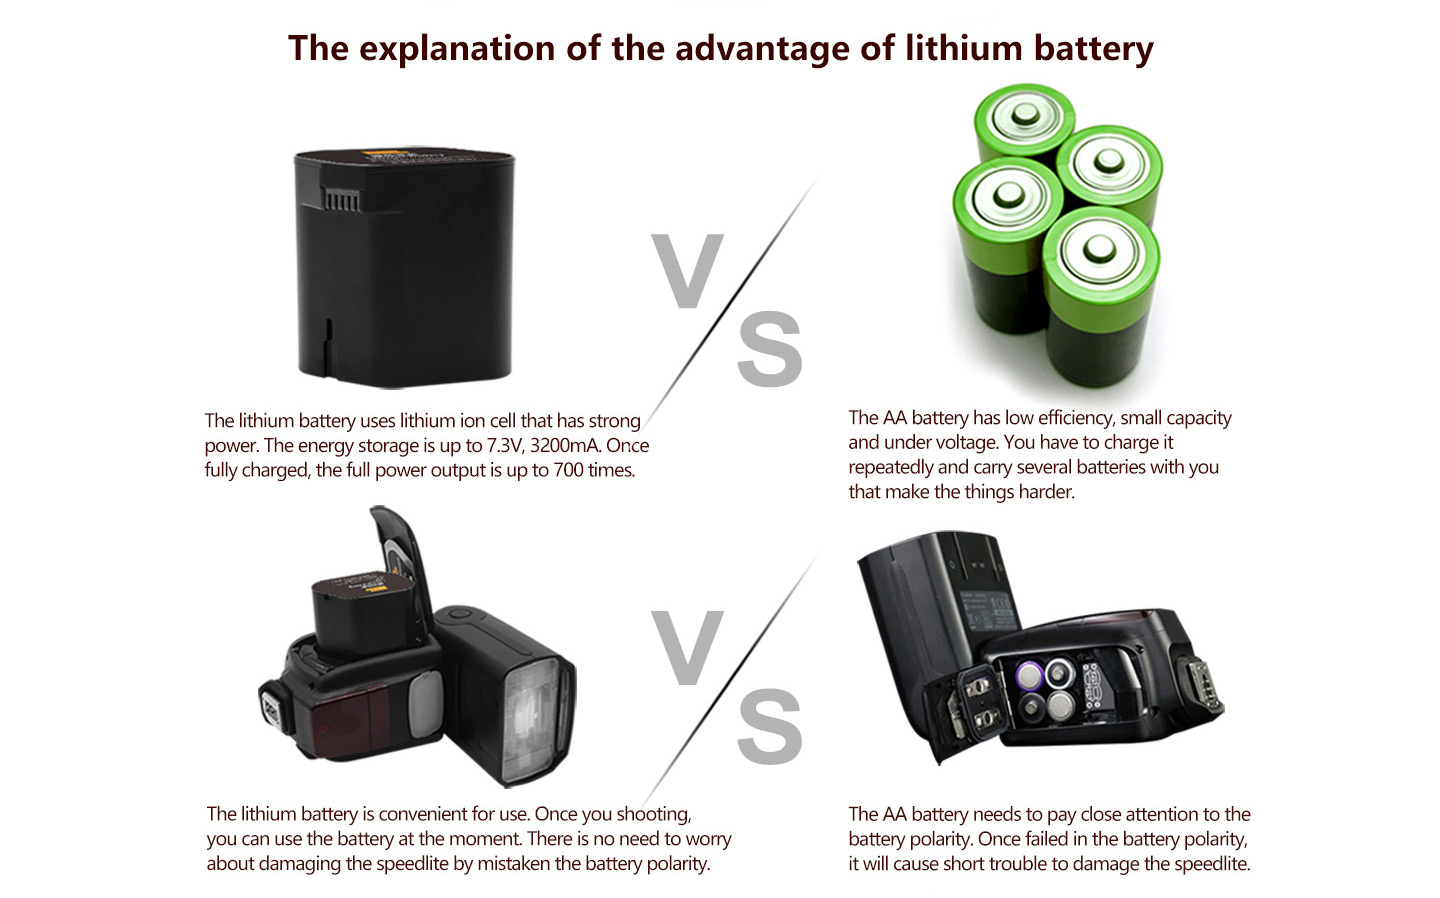 The explanation of the advantage of lithium battery